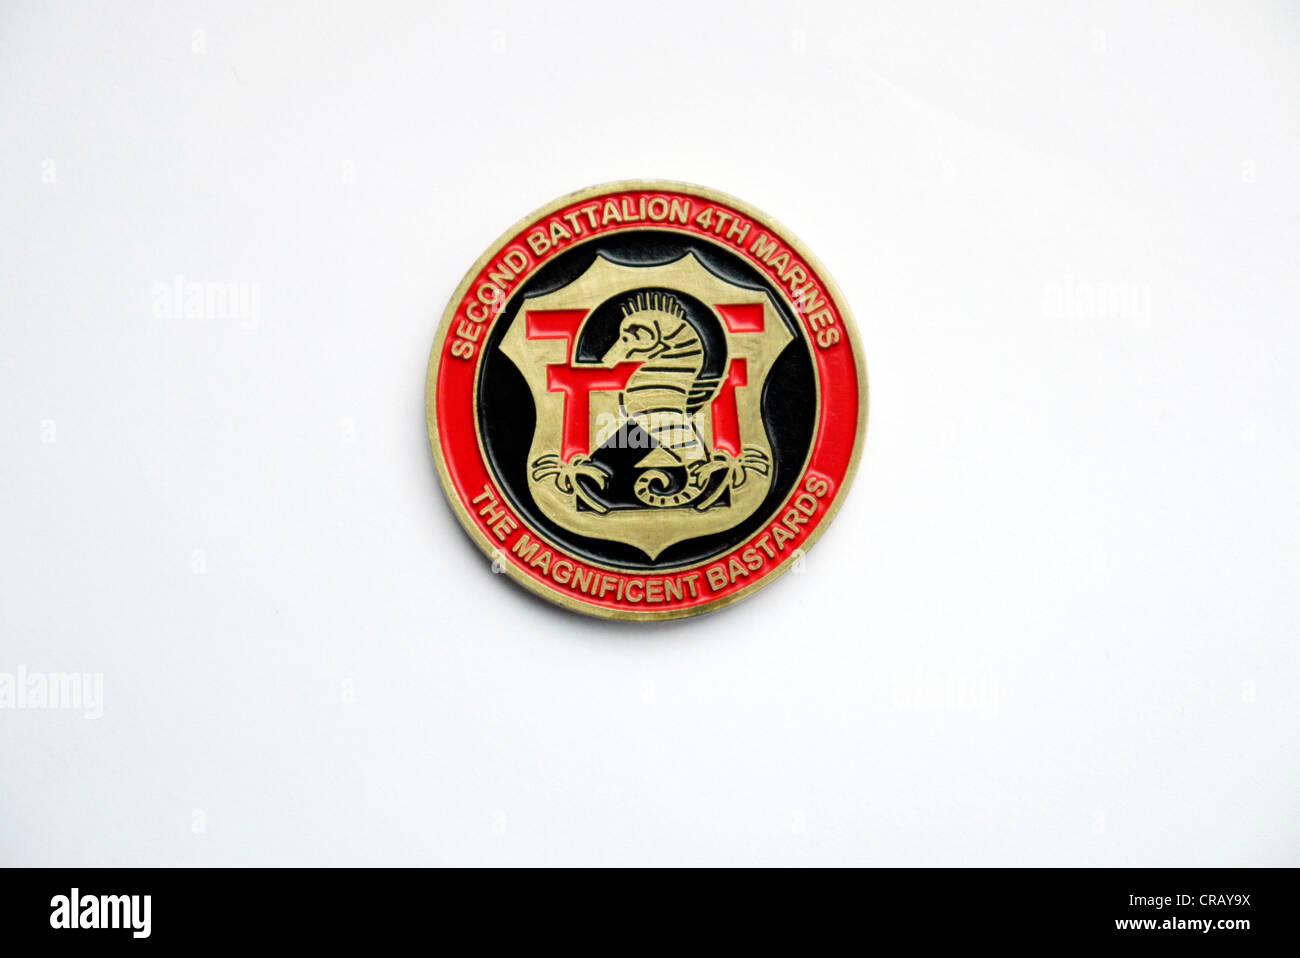 Second Battalion 4th Marines Coin Stock Photo